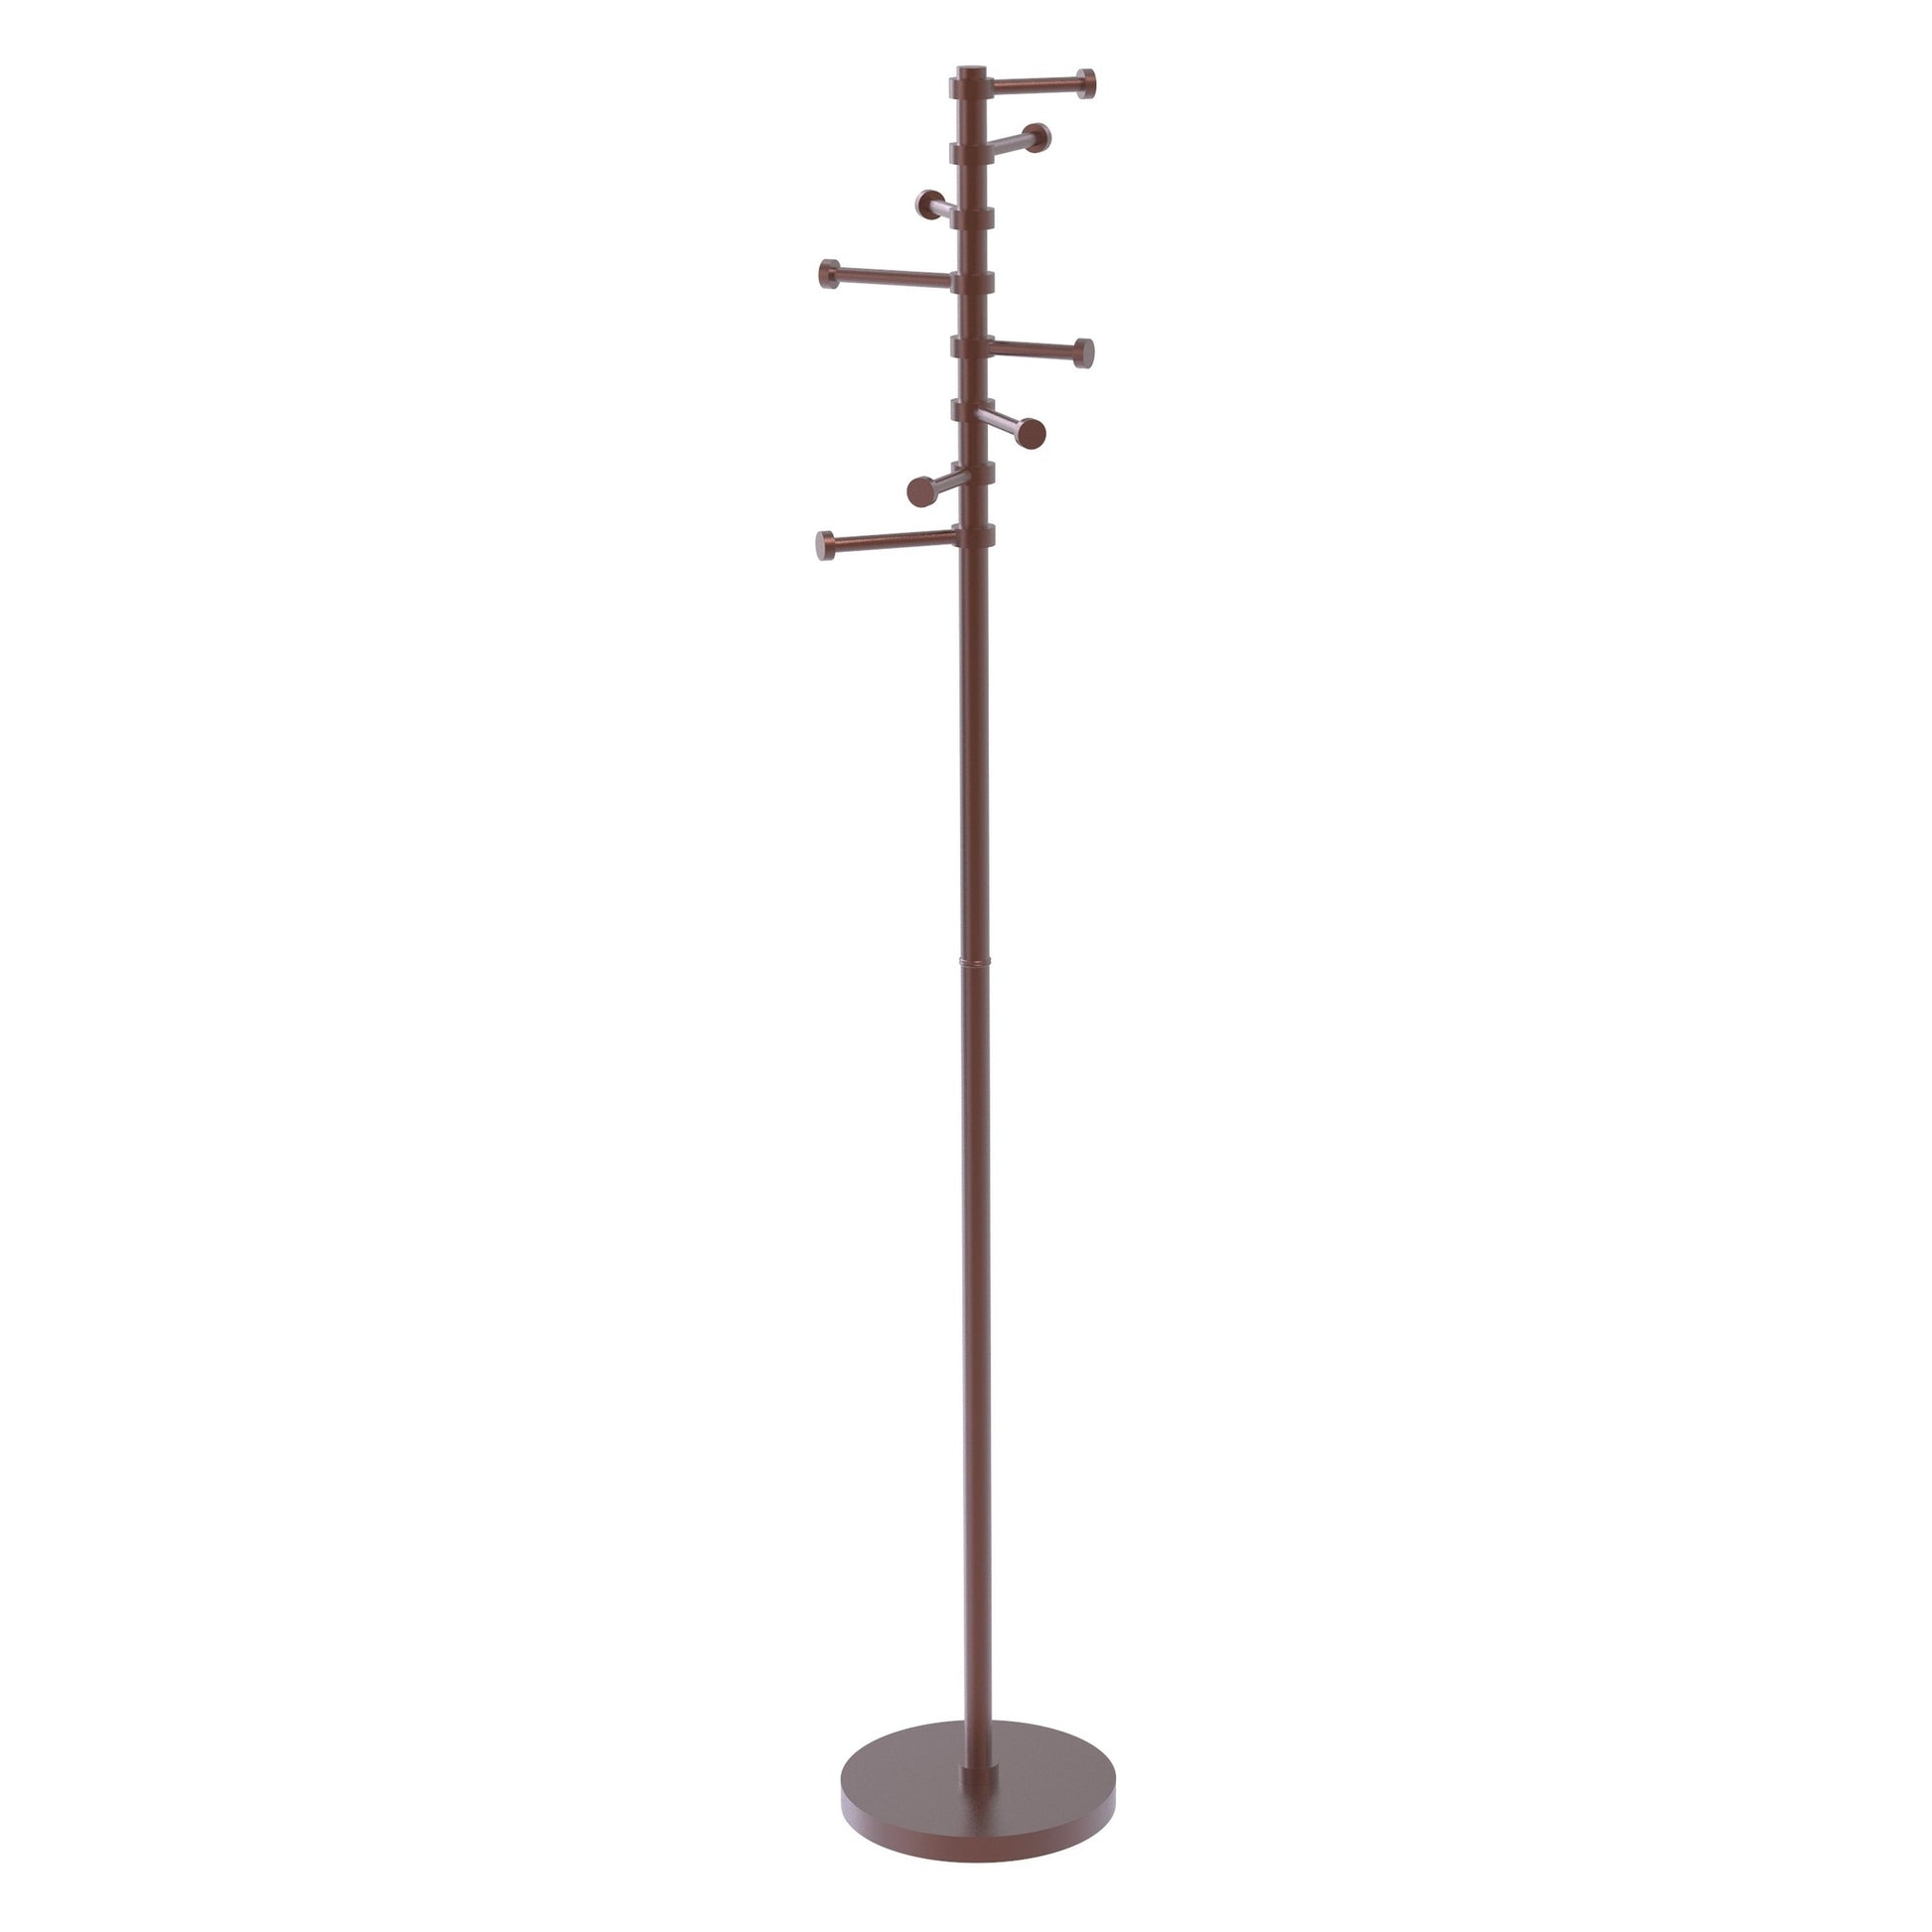 Allied Brass CS-1 10" x 10" Antique Copper Solid Brass Free Standing Coat Rack With Six Pivoting Pegs